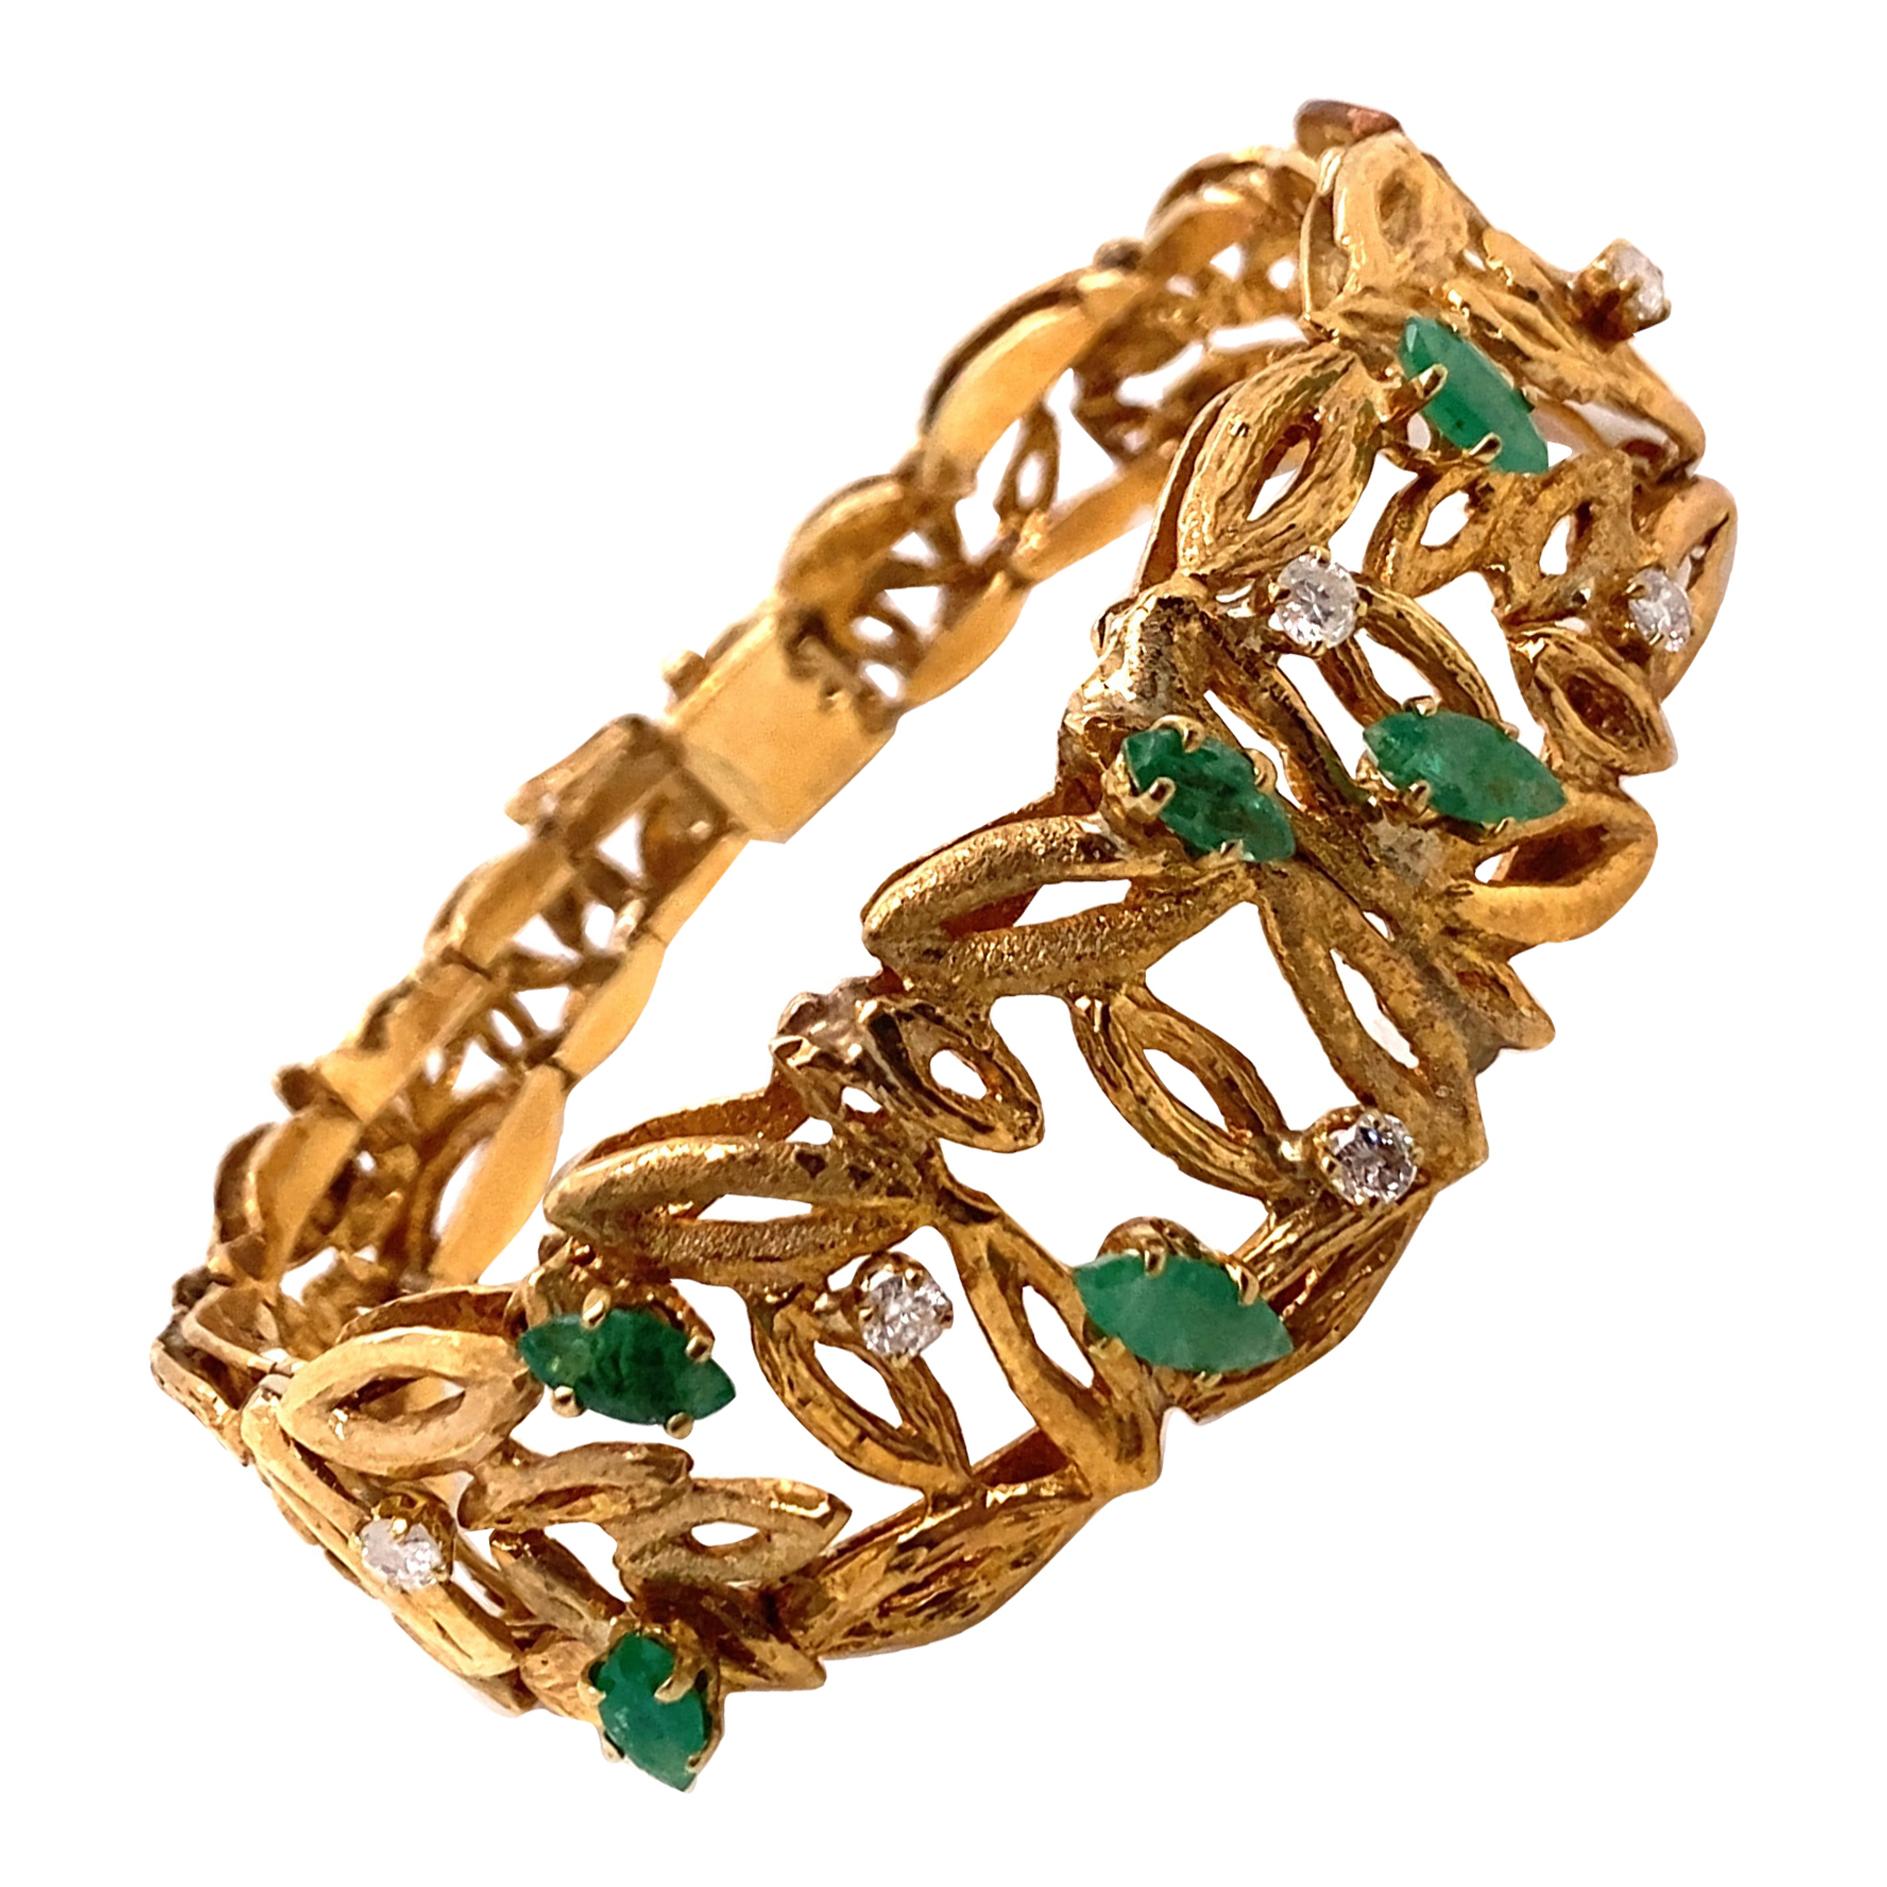 Vintage 1980's 14K Yellow Gold Bracelet with Emeralds and Diamonds